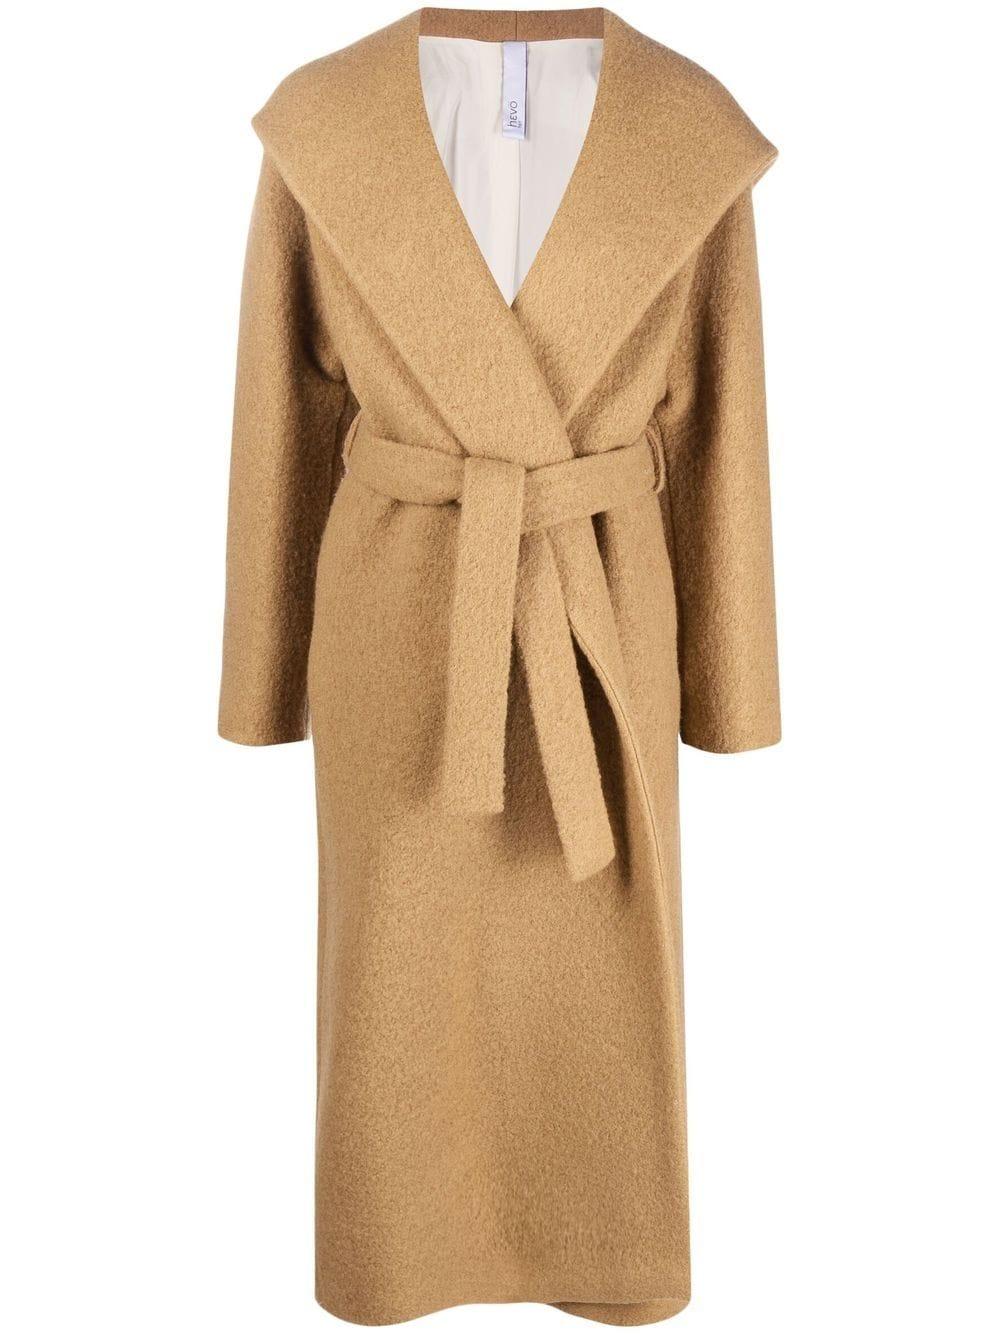 Hevò Hooded Tied-waist Coat in Natural | Lyst